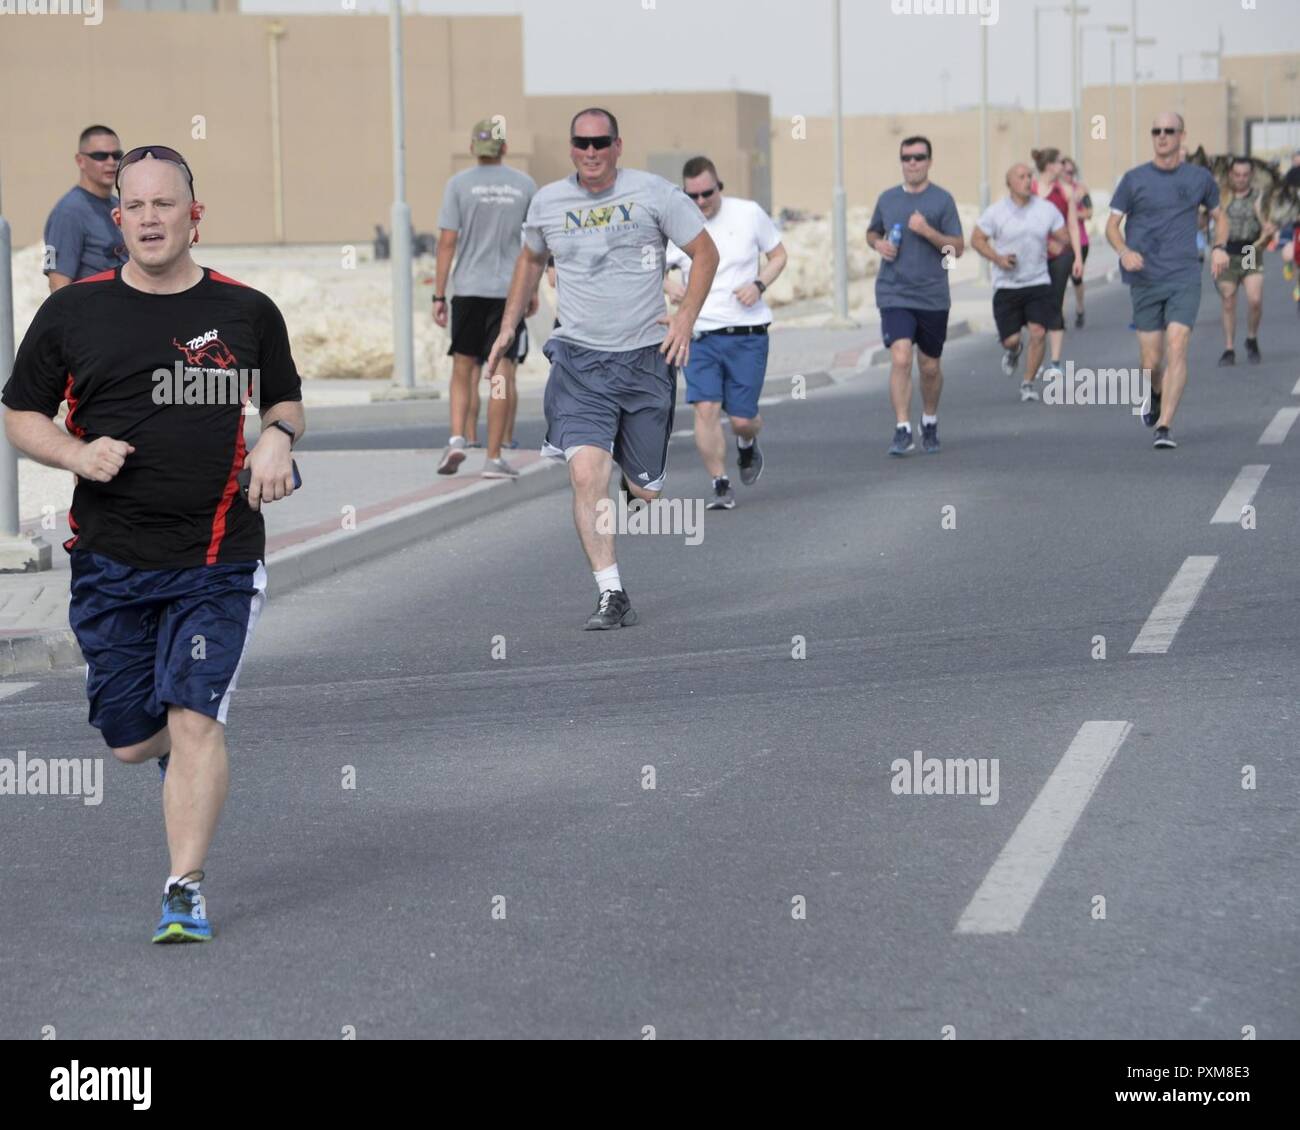 Military members participate in the annual Explosive Ordinance Disposal 5K Memorial Run at Al Udeid Air Base, Qatar, June 3, 2017. Service members from across the base gathered to take part in the EOD 5K Memorial Run in memory of the EOD men and women killed in action during combat operations. Stock Photo